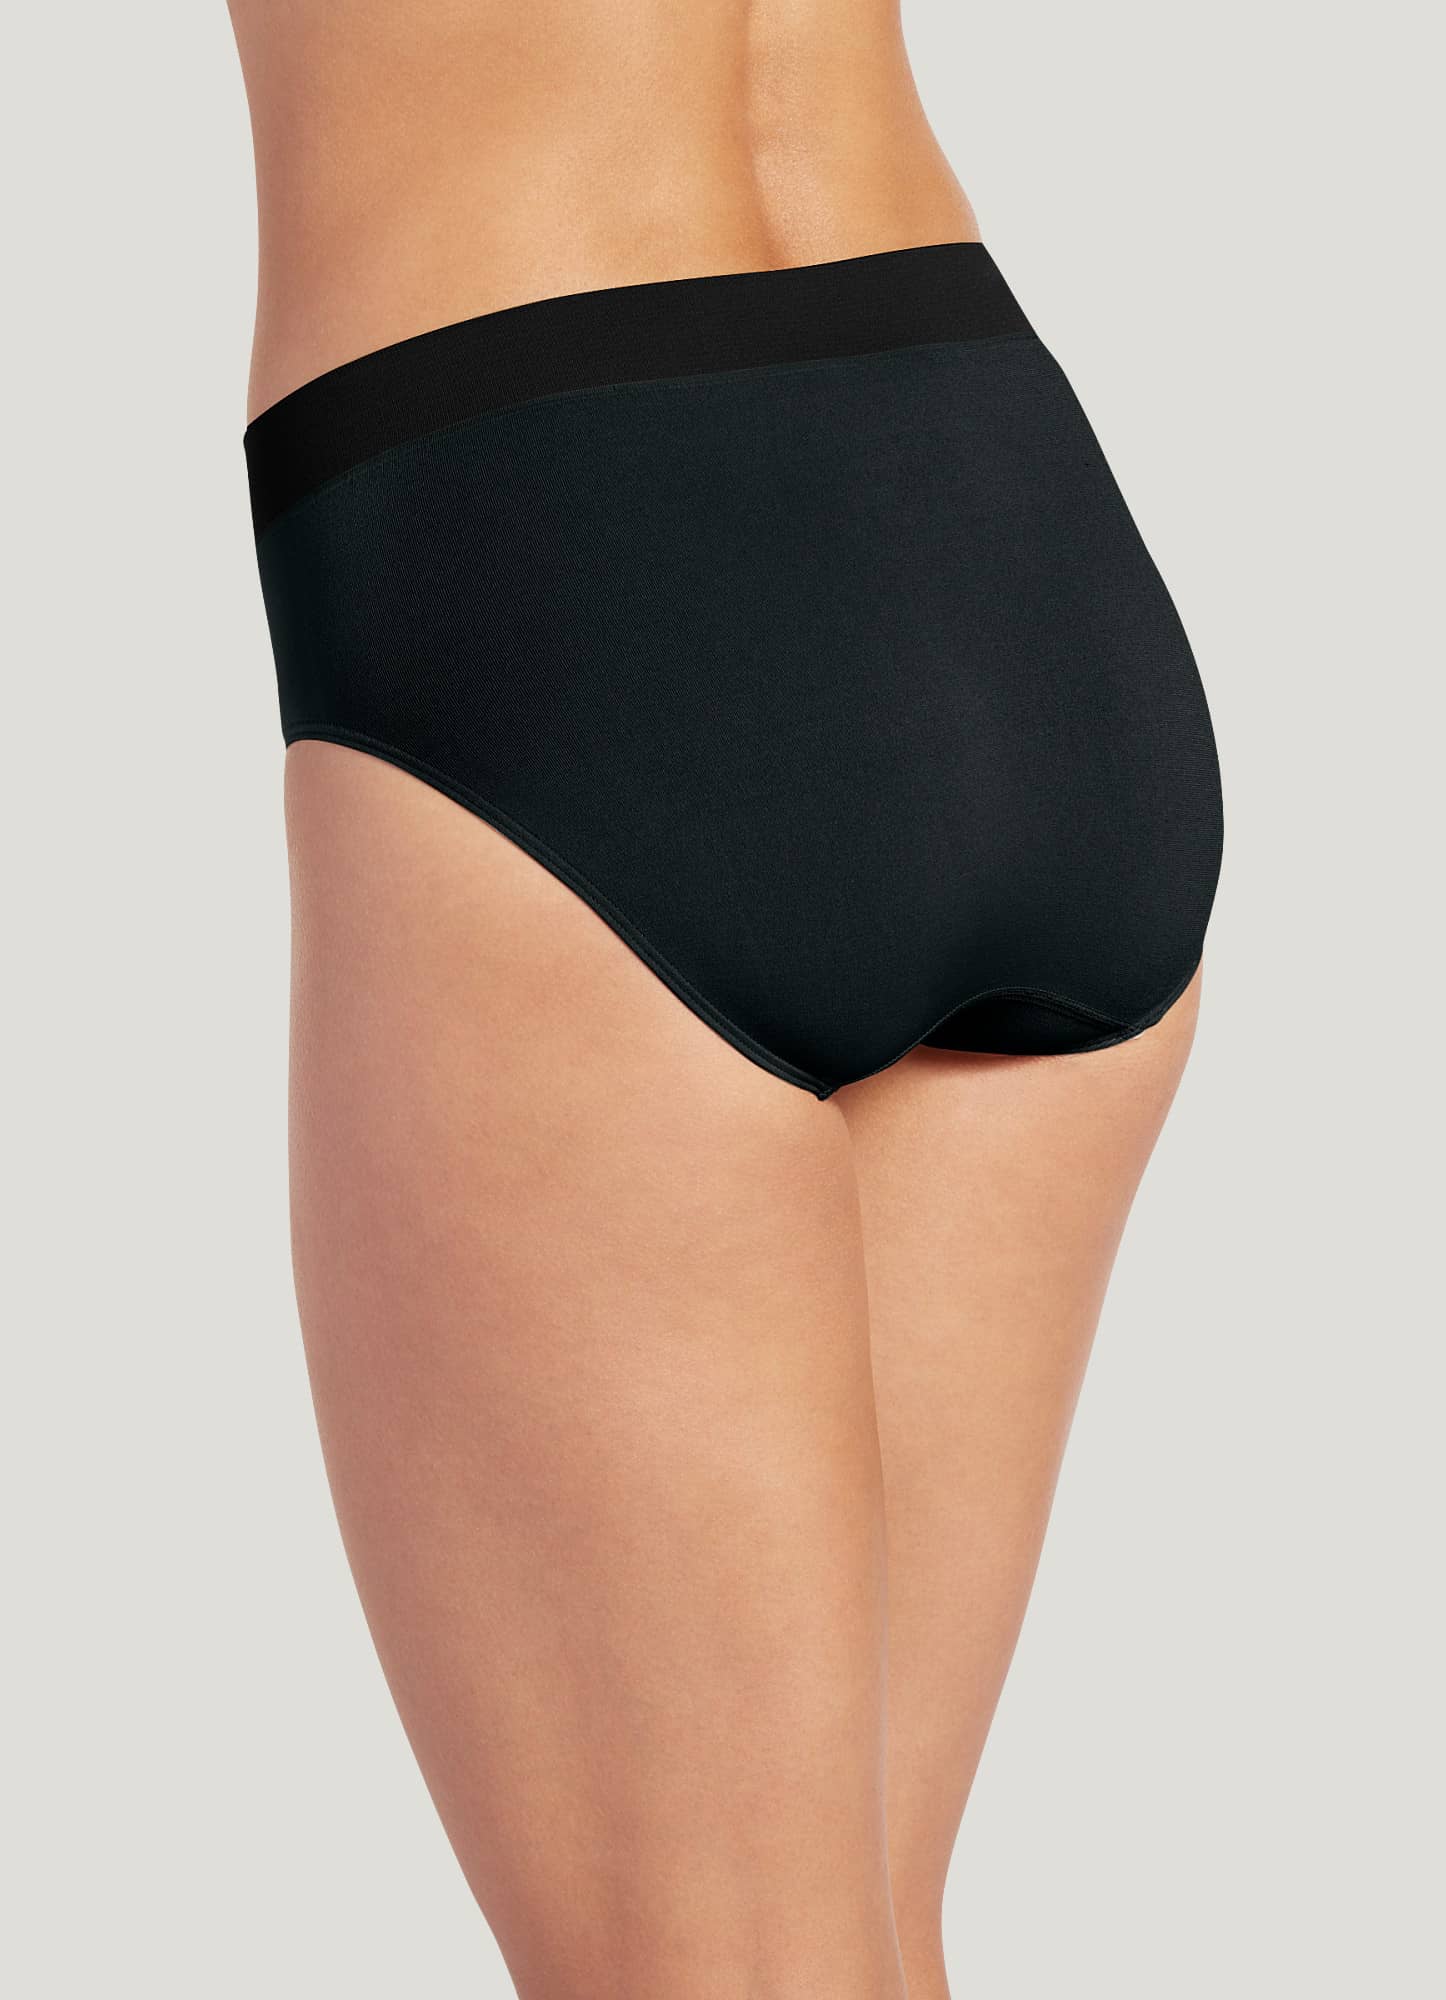 Deadgoodundies.com - NEW ARRIVAL - Jockey Women's Modern Micro Seamfree  underwear. Fabulously smooth and stretchy, in light beige, black or white,  there are three brief shapes (bikini, hipster and hi cut) and